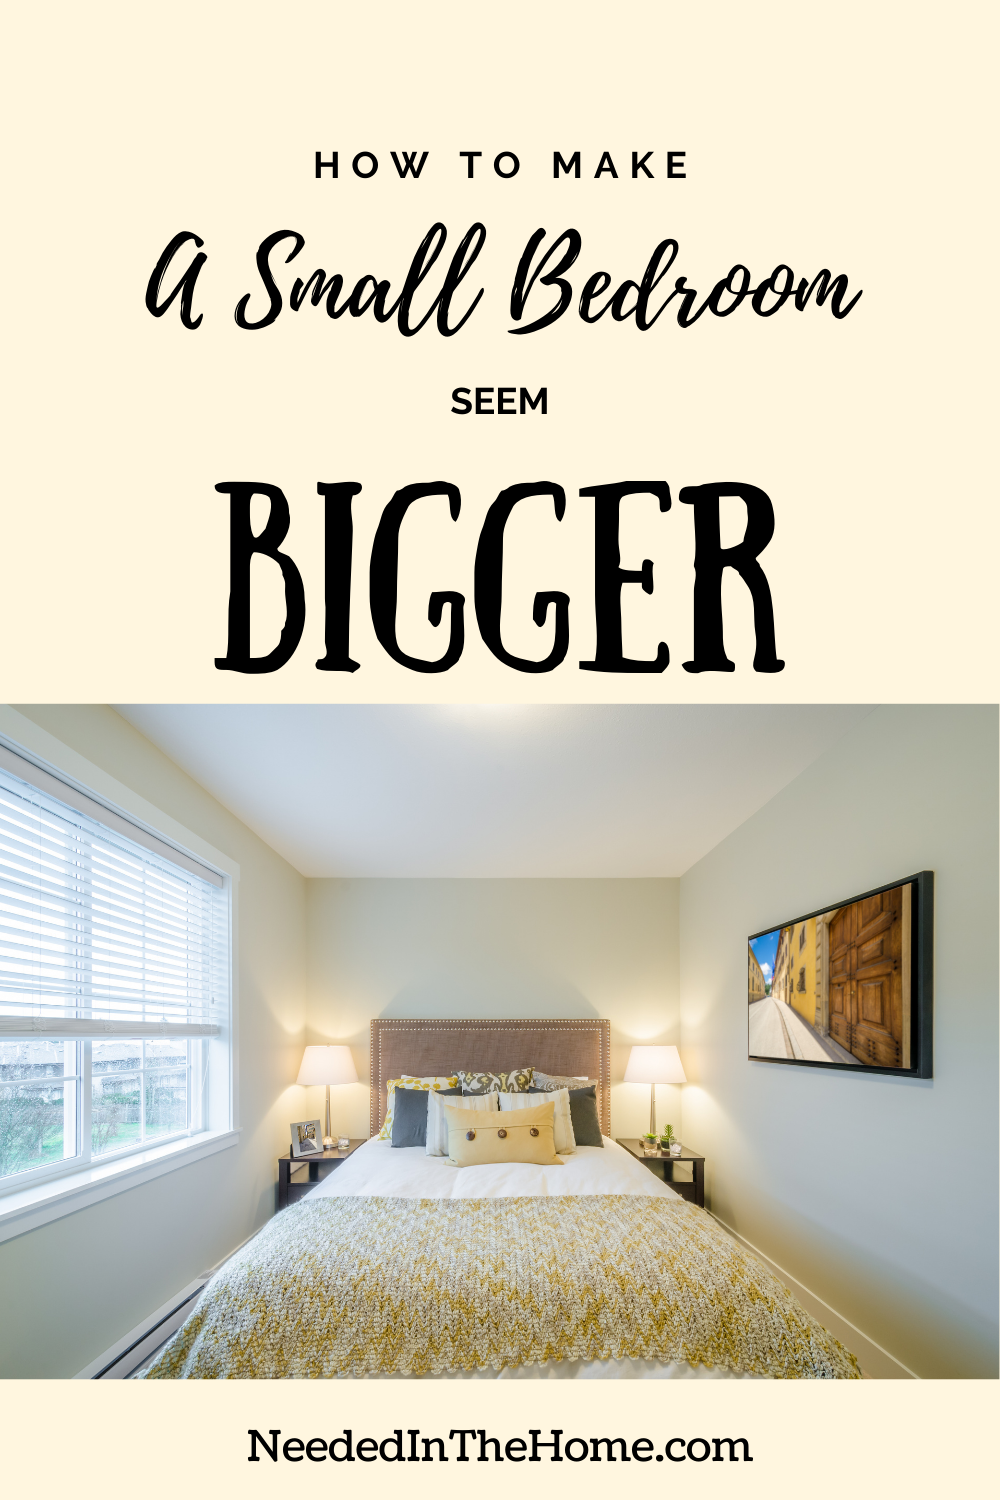 pinterest-pin-description how to make a small bedroom seem bigger cream colored walls large picture small lamps side tables bed large window neededinthehome